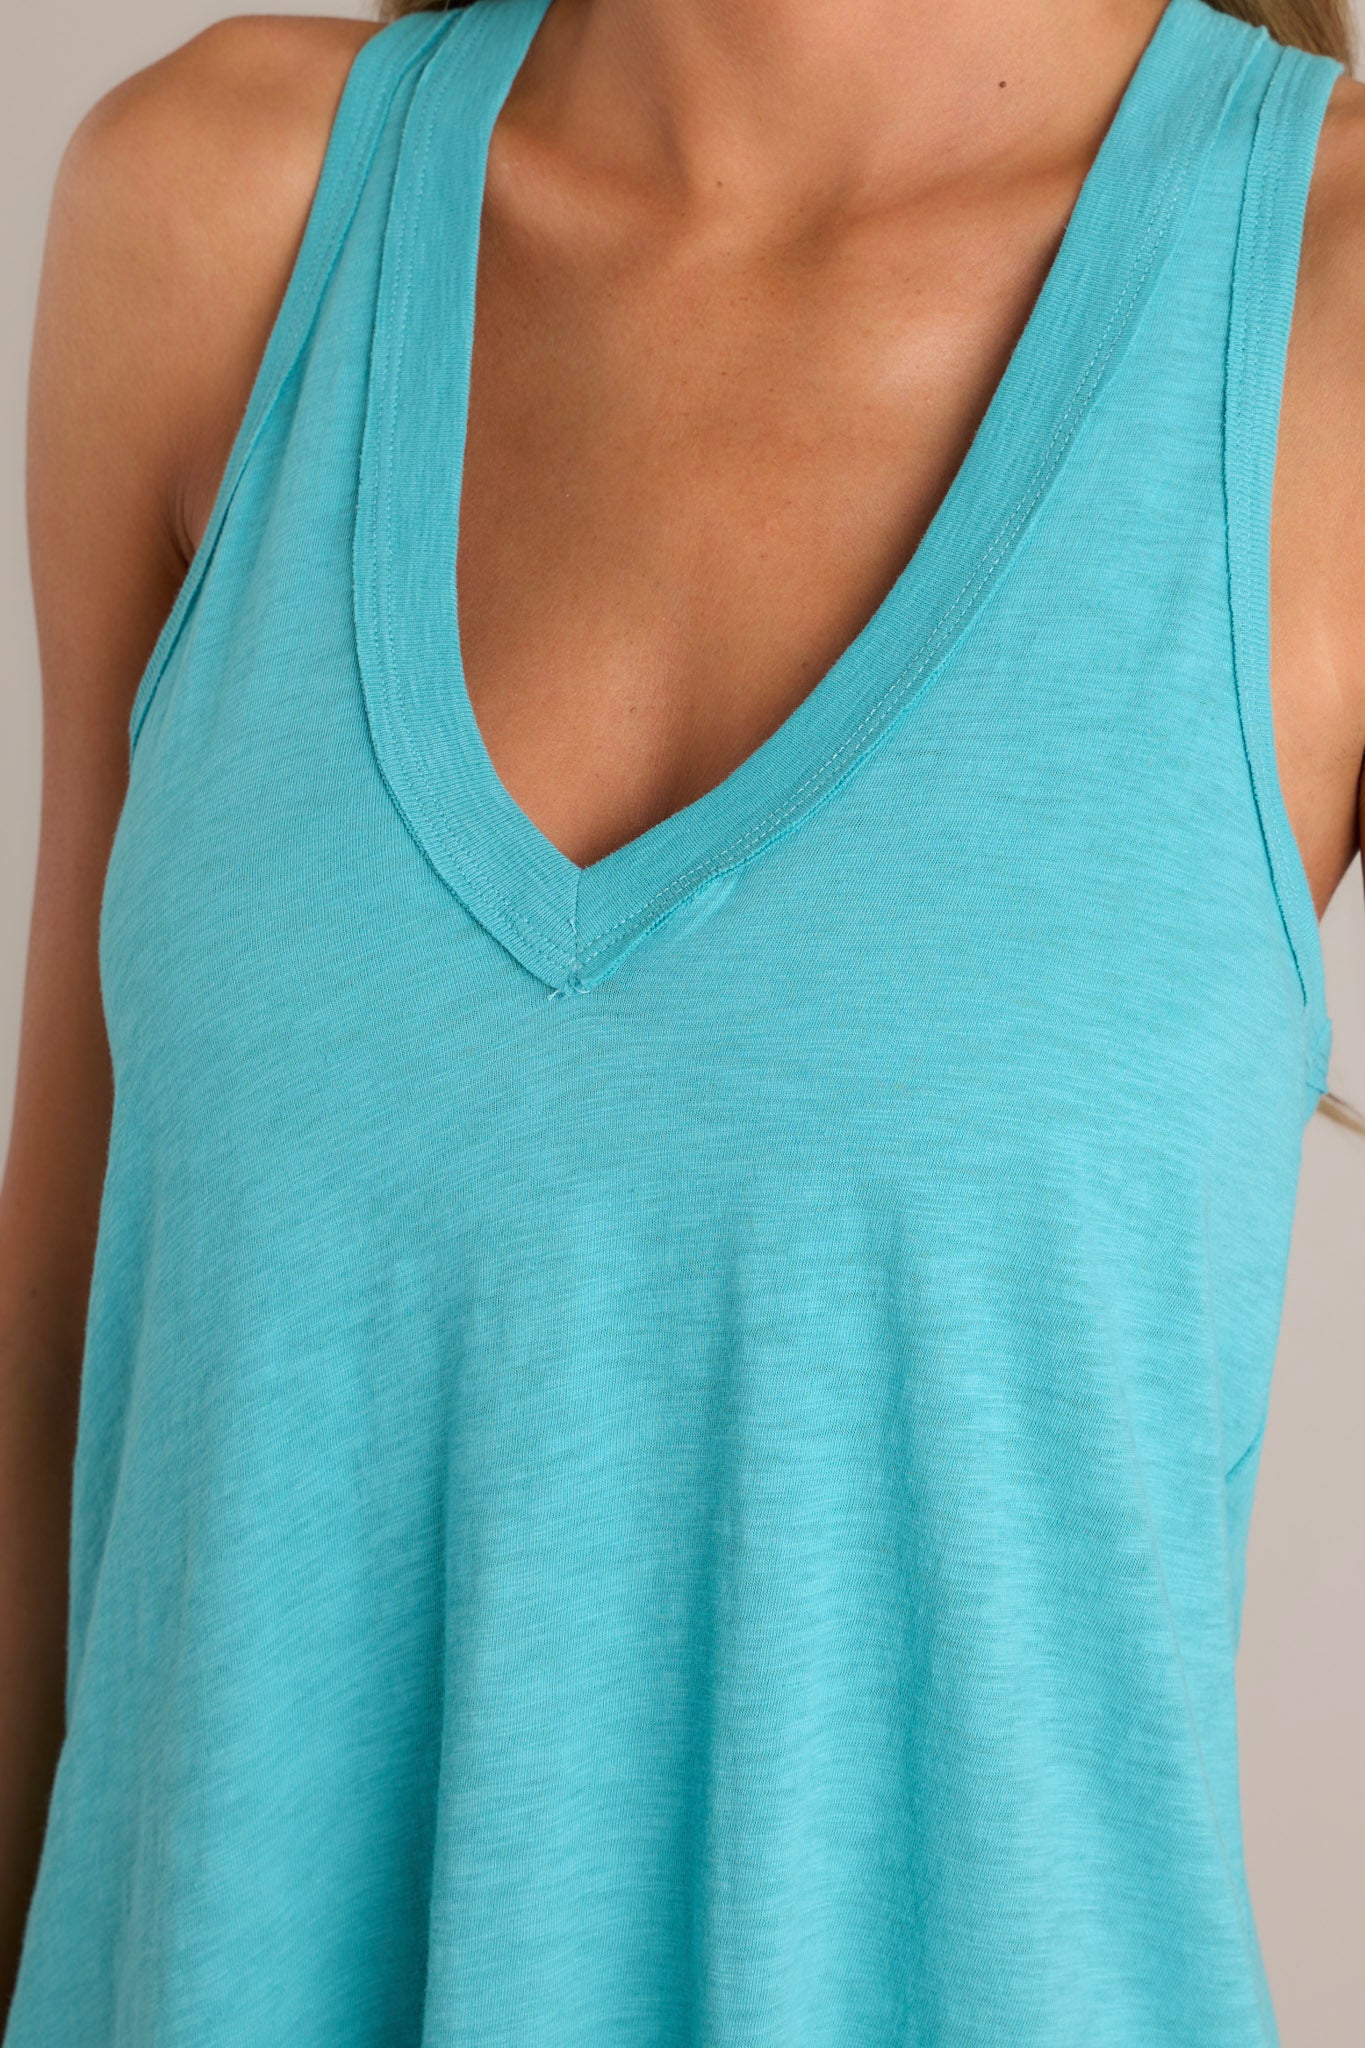 Close-up of the v-neckline and racerback design of a teal mini dress, highlighting the flowing silhouette and summer-ready color.